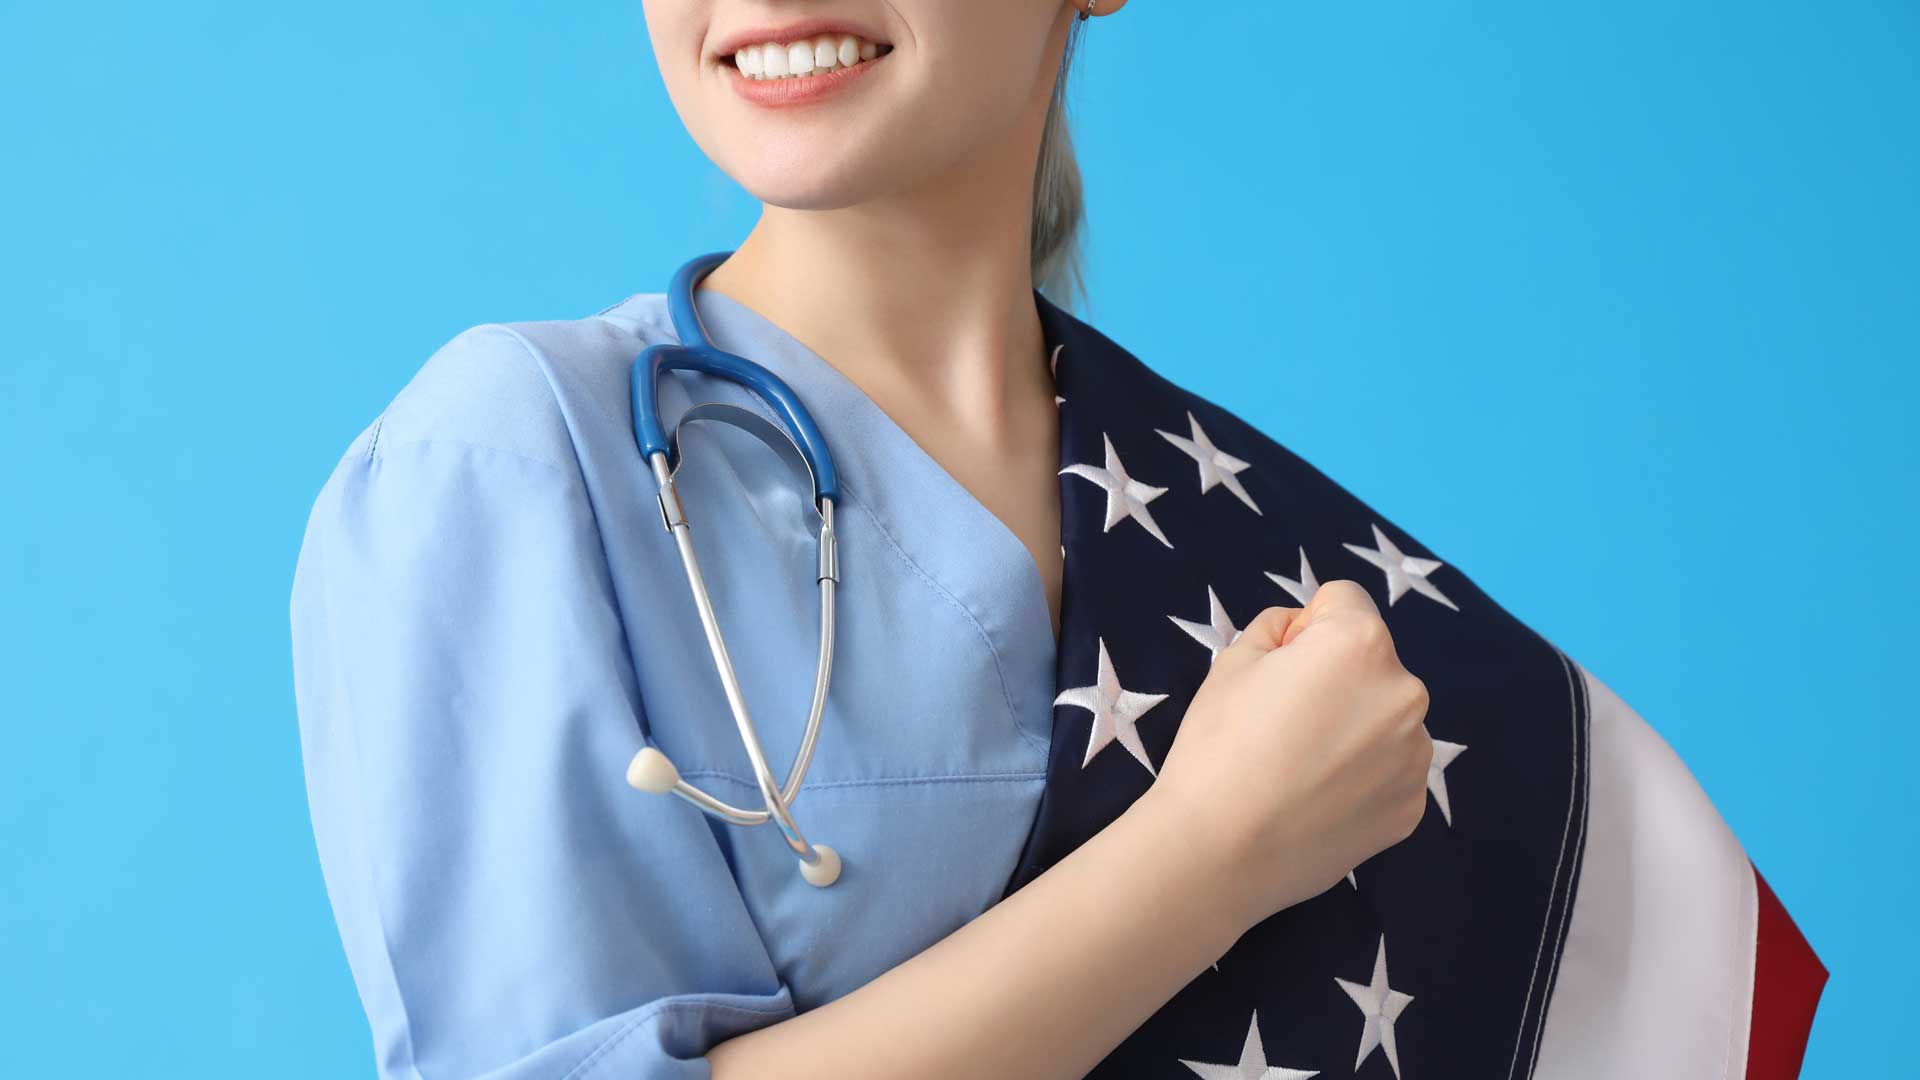 Advocating for Medical Freedom